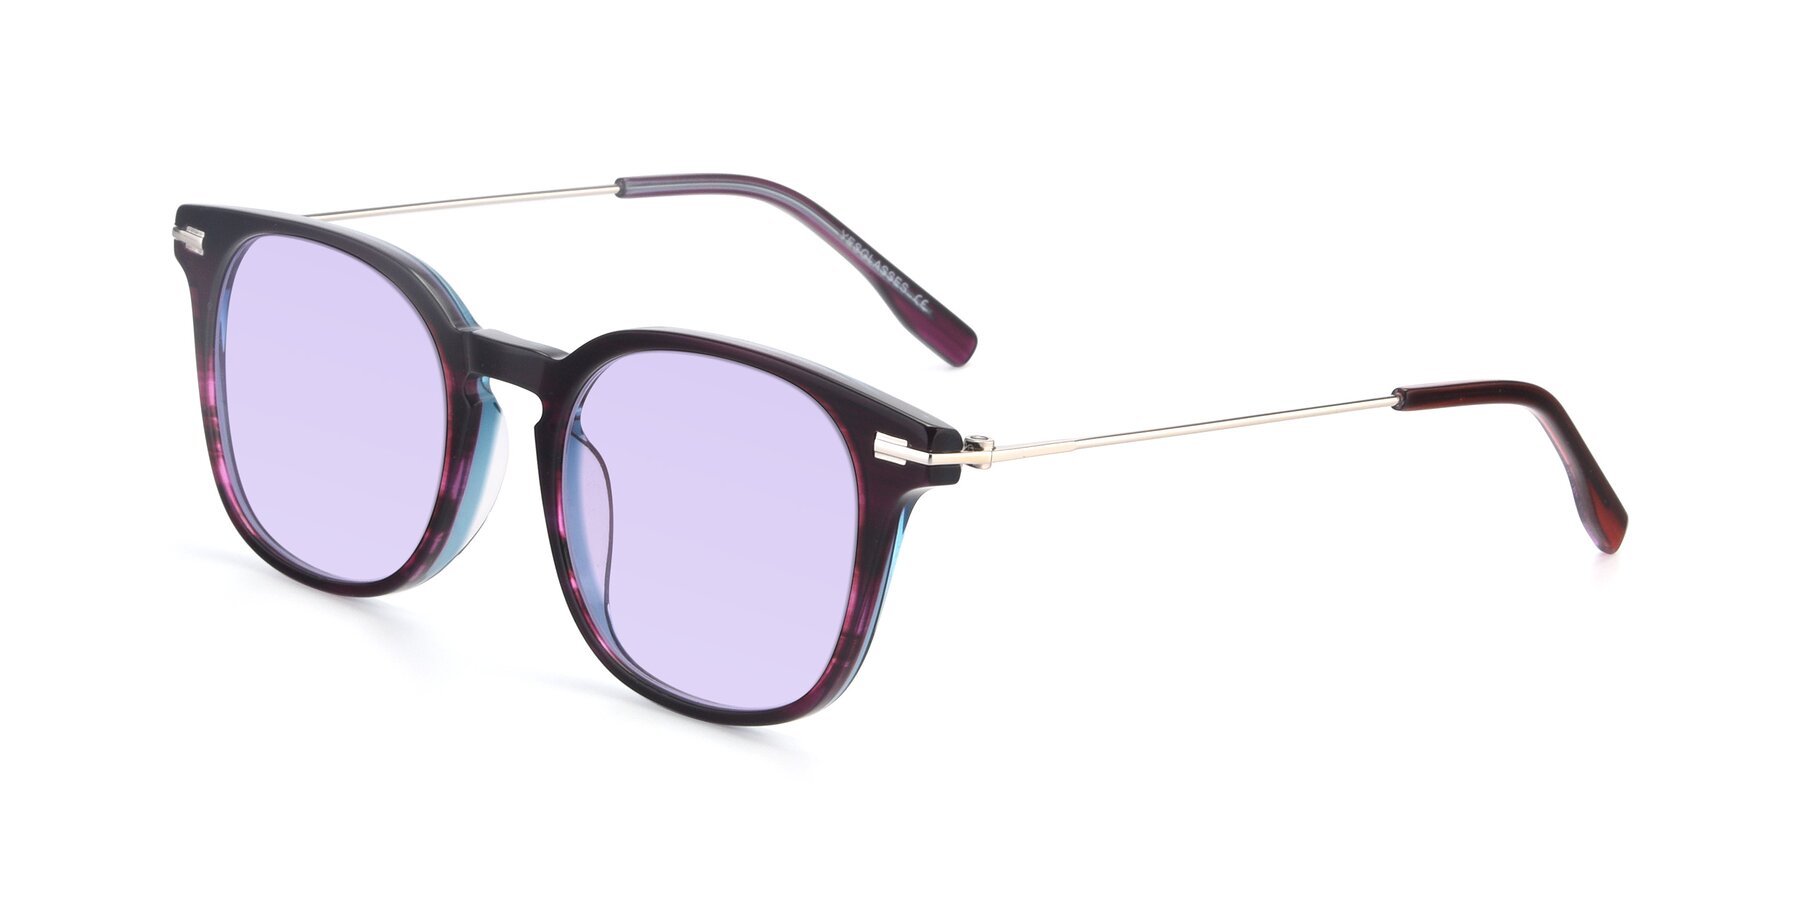 Angle of 17711 in Dark Purple with Light Purple Tinted Lenses